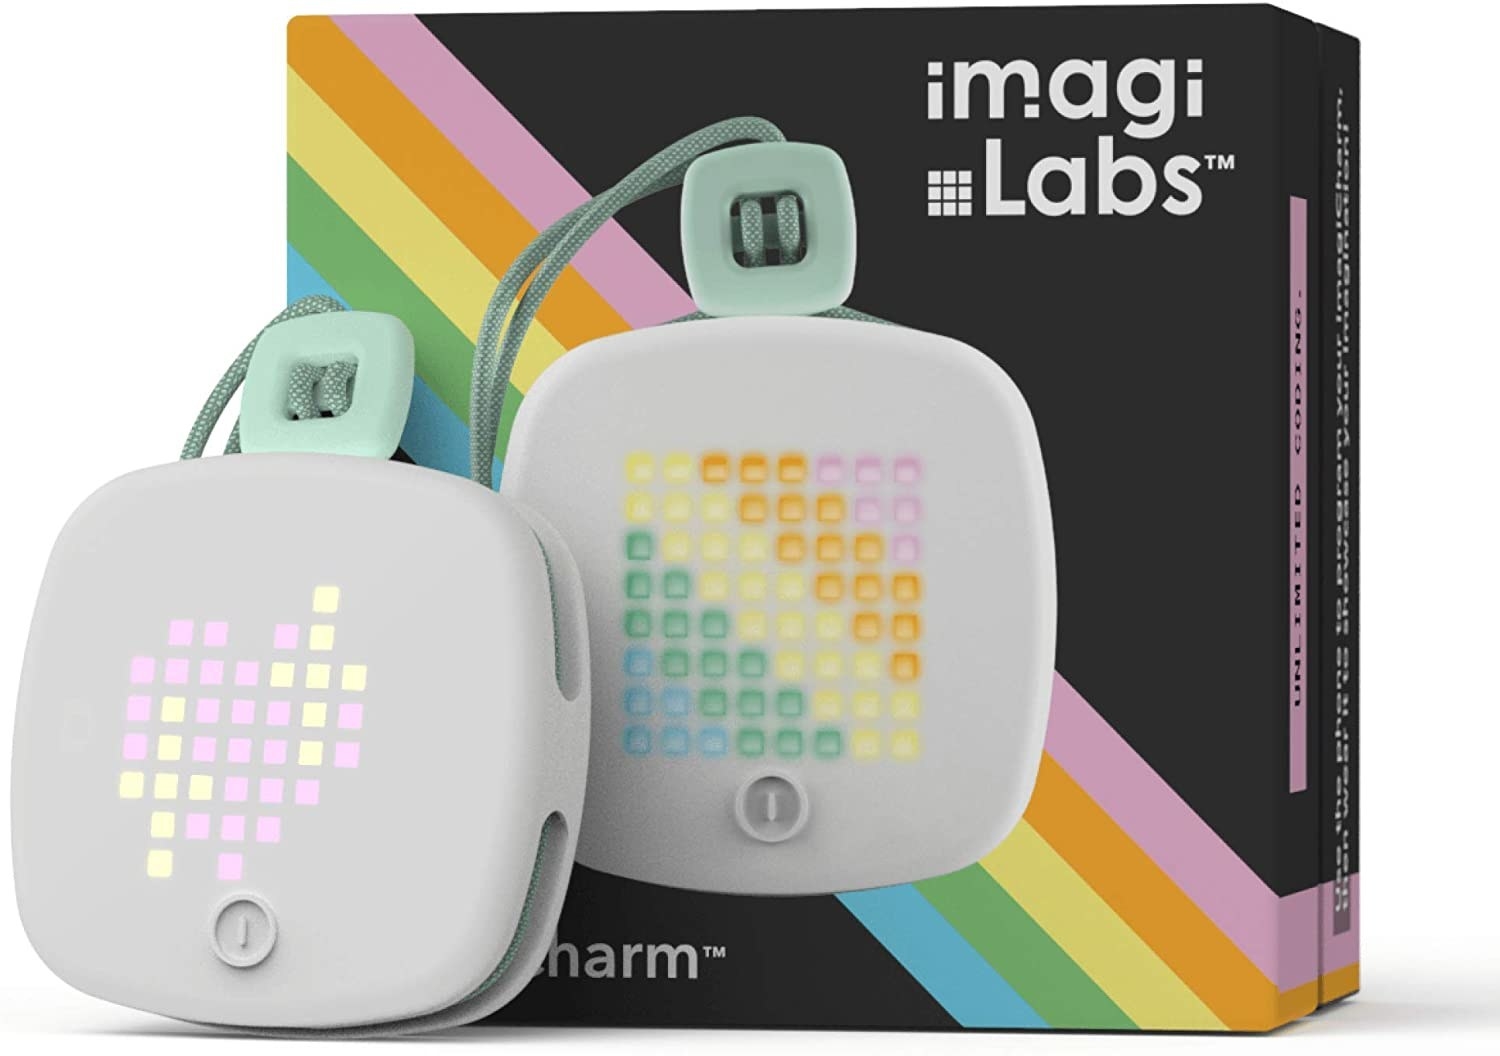 The imagiCharm device set in front of its box.